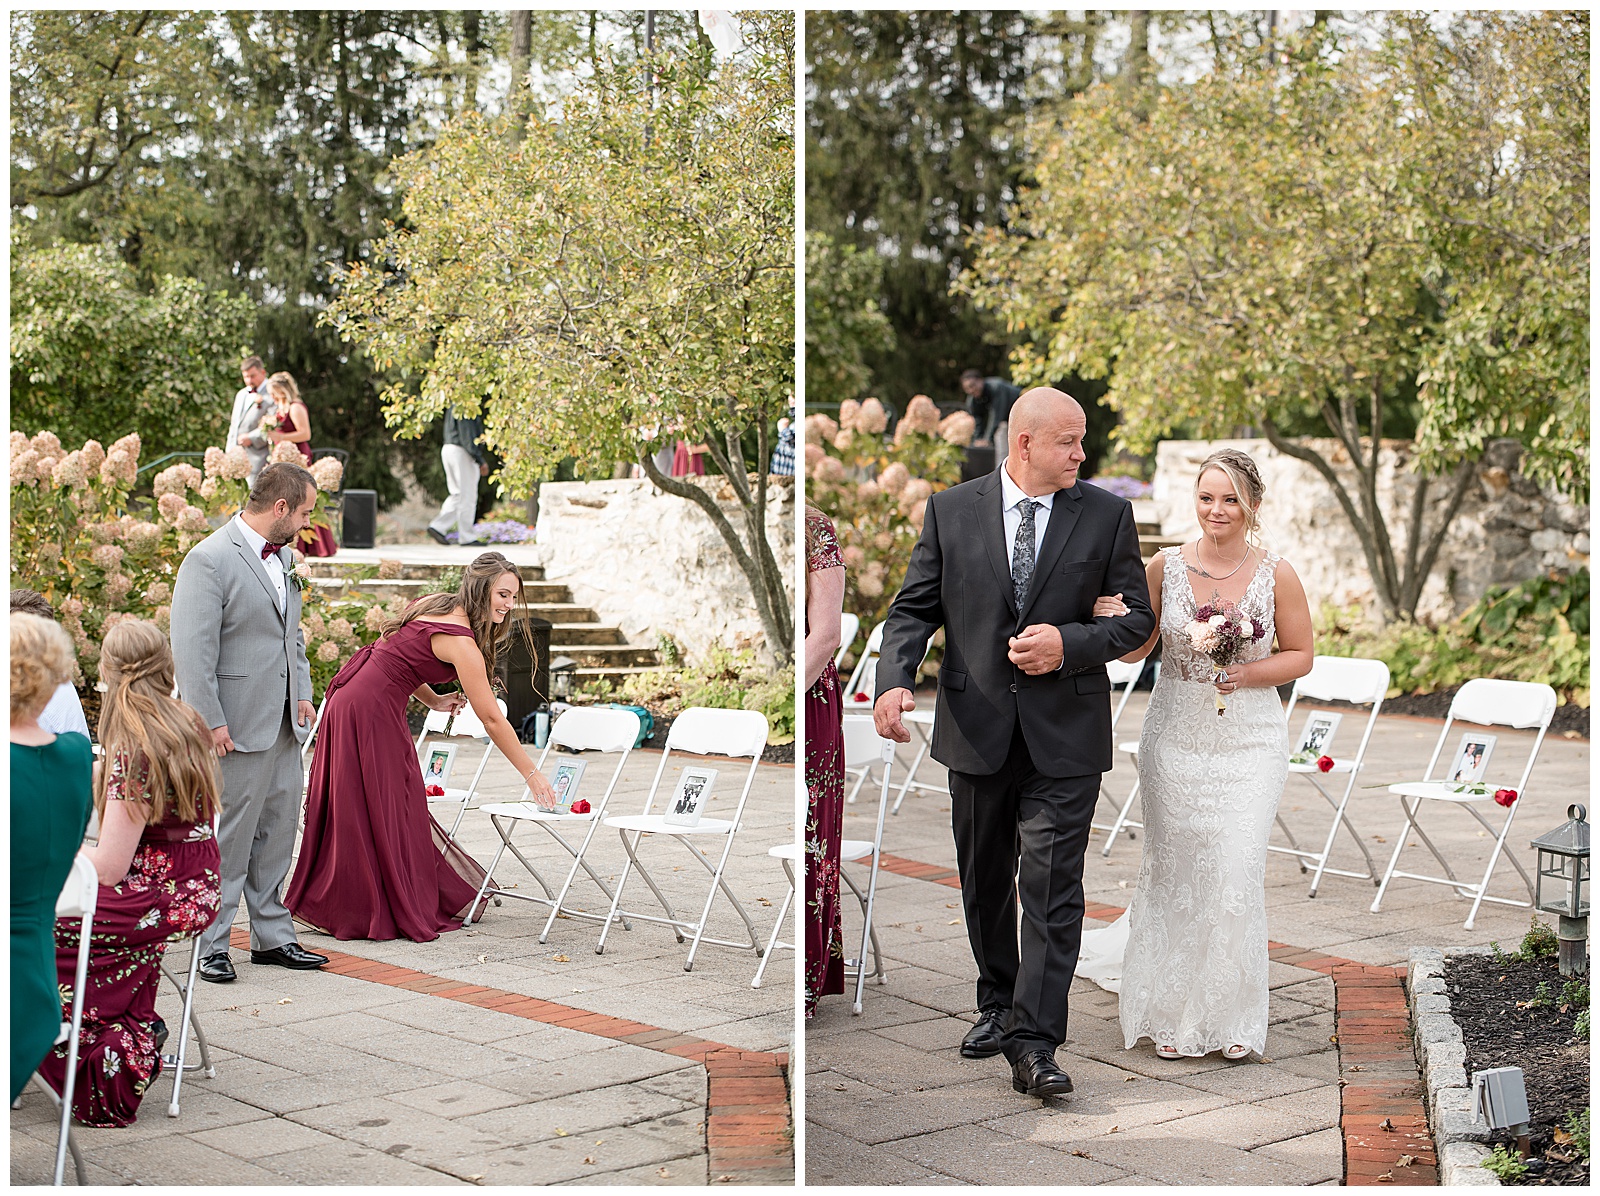 guests watch father walk bride down the aisle at wedding ceremony